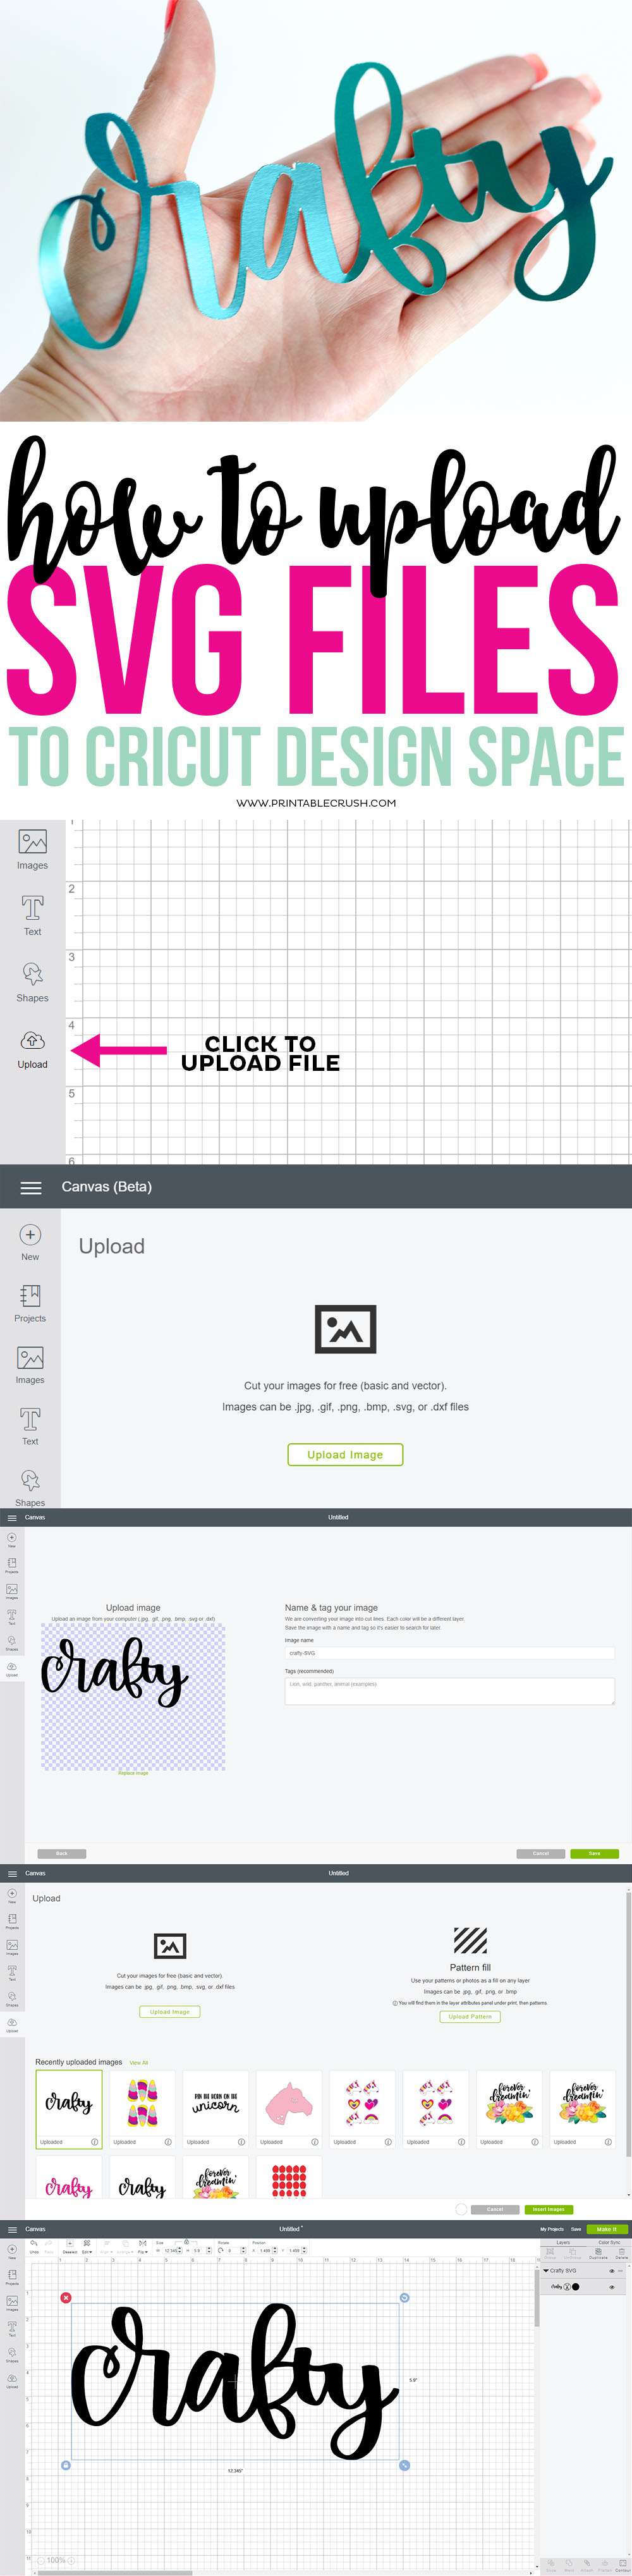 How to Upload SVG Files to Cricut Design Space - Printable Crush